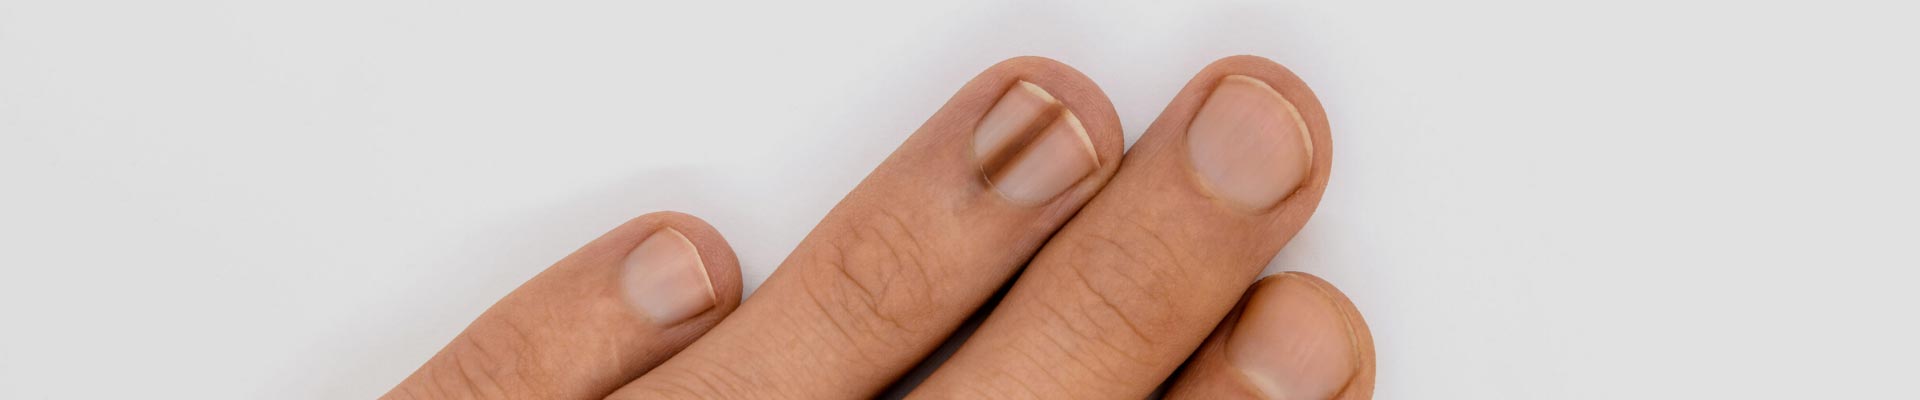 I'm 15 and South-East Asian Female, I have this brown line on my thumb. Is  this possibly a melanonychia or melanoma? - Quora